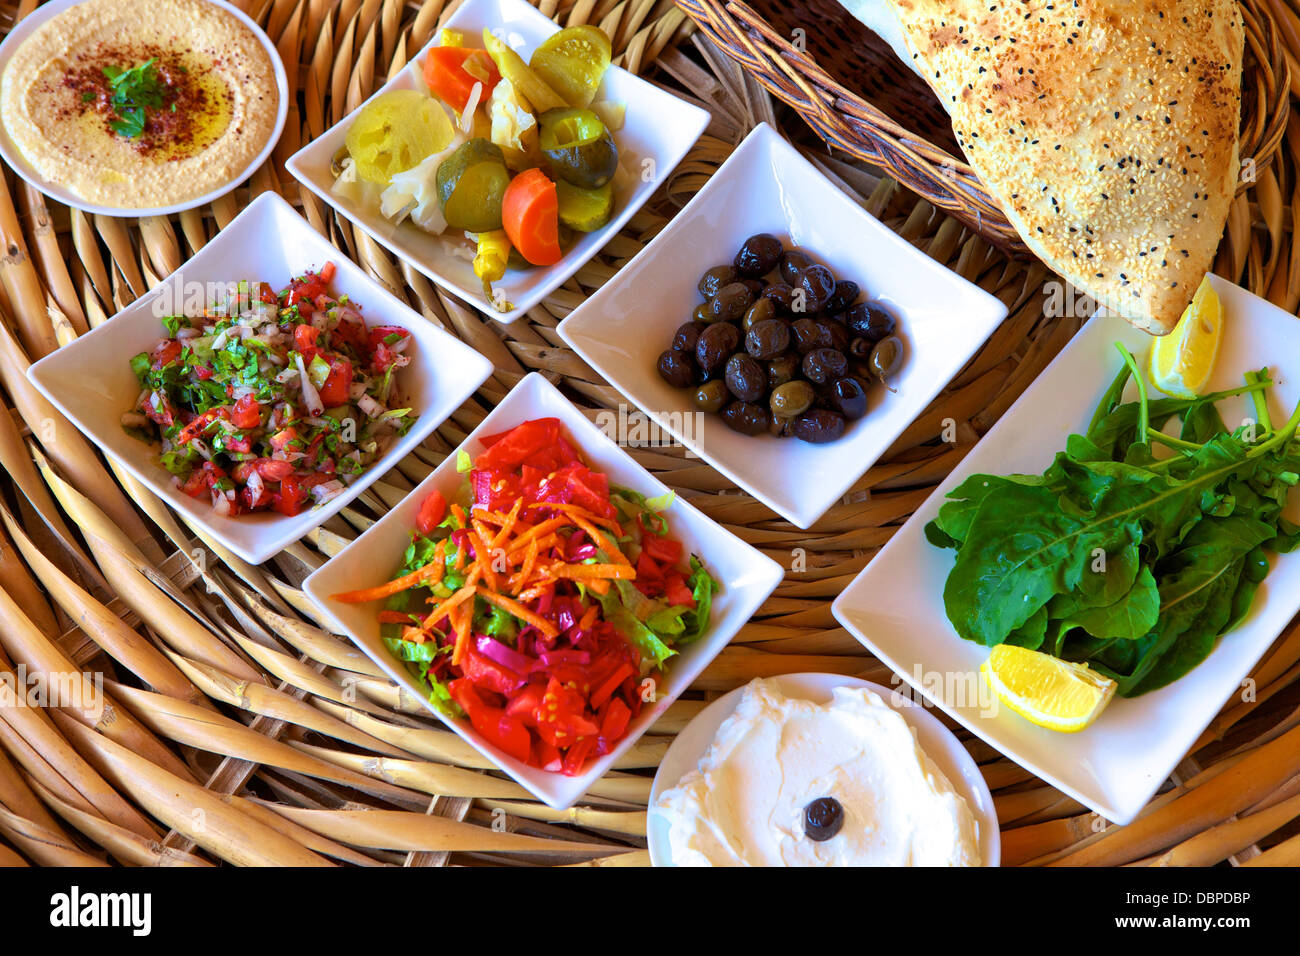 Meze dishes, North Cyprus, Cyprus, Europe Stock Photo